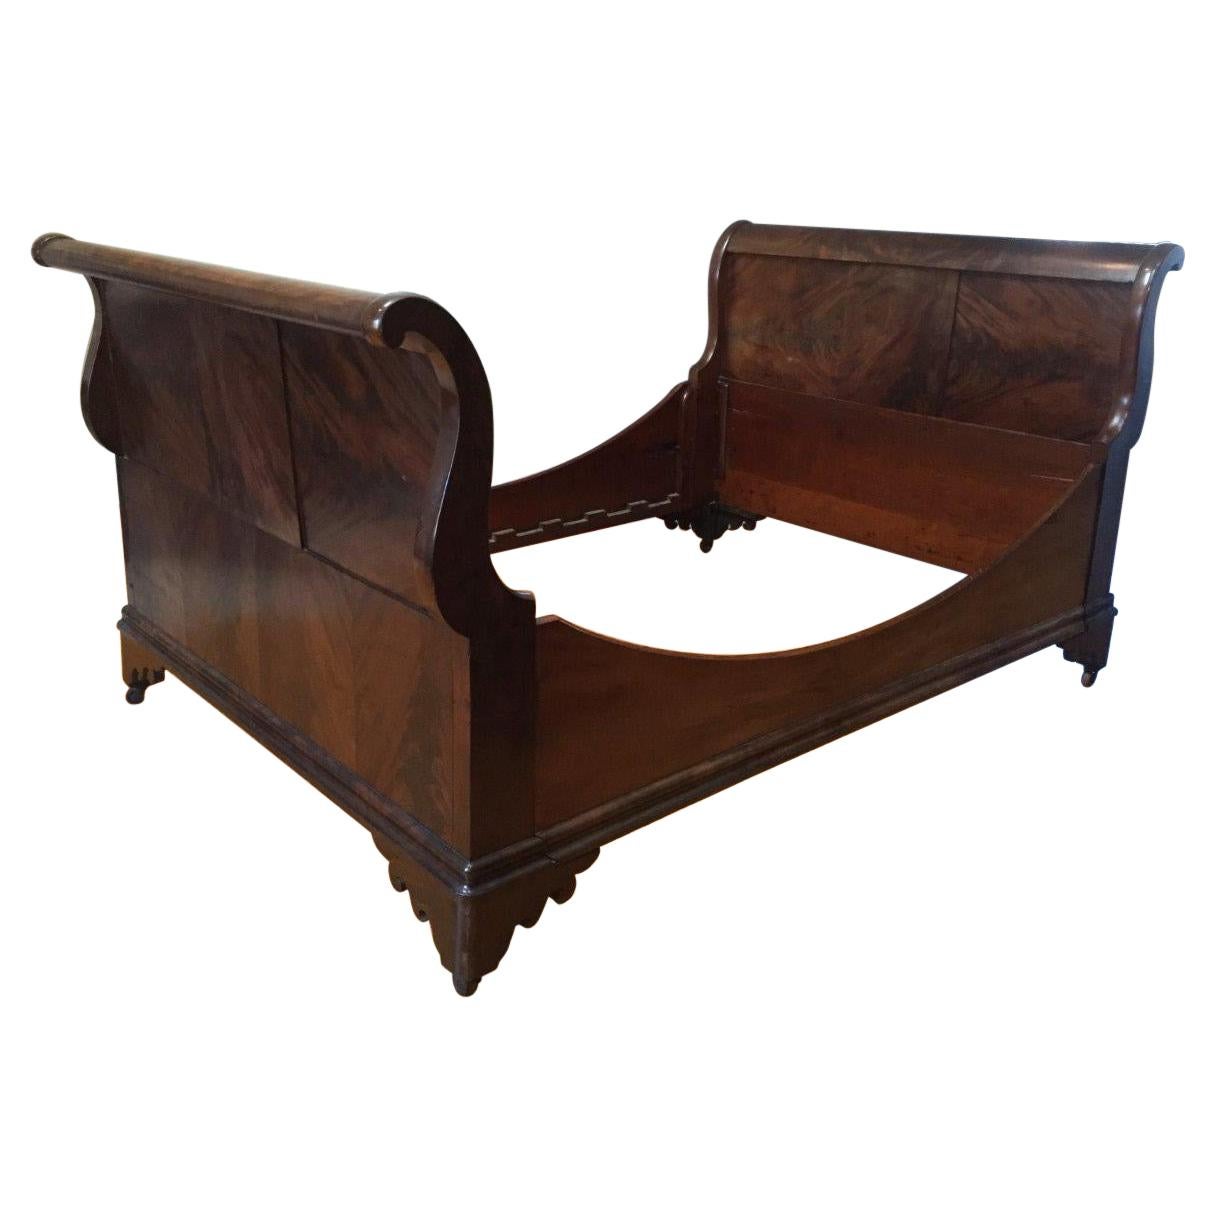 Stately Antique English Full Size Flame Mahogany Sleigh Bed Daybed